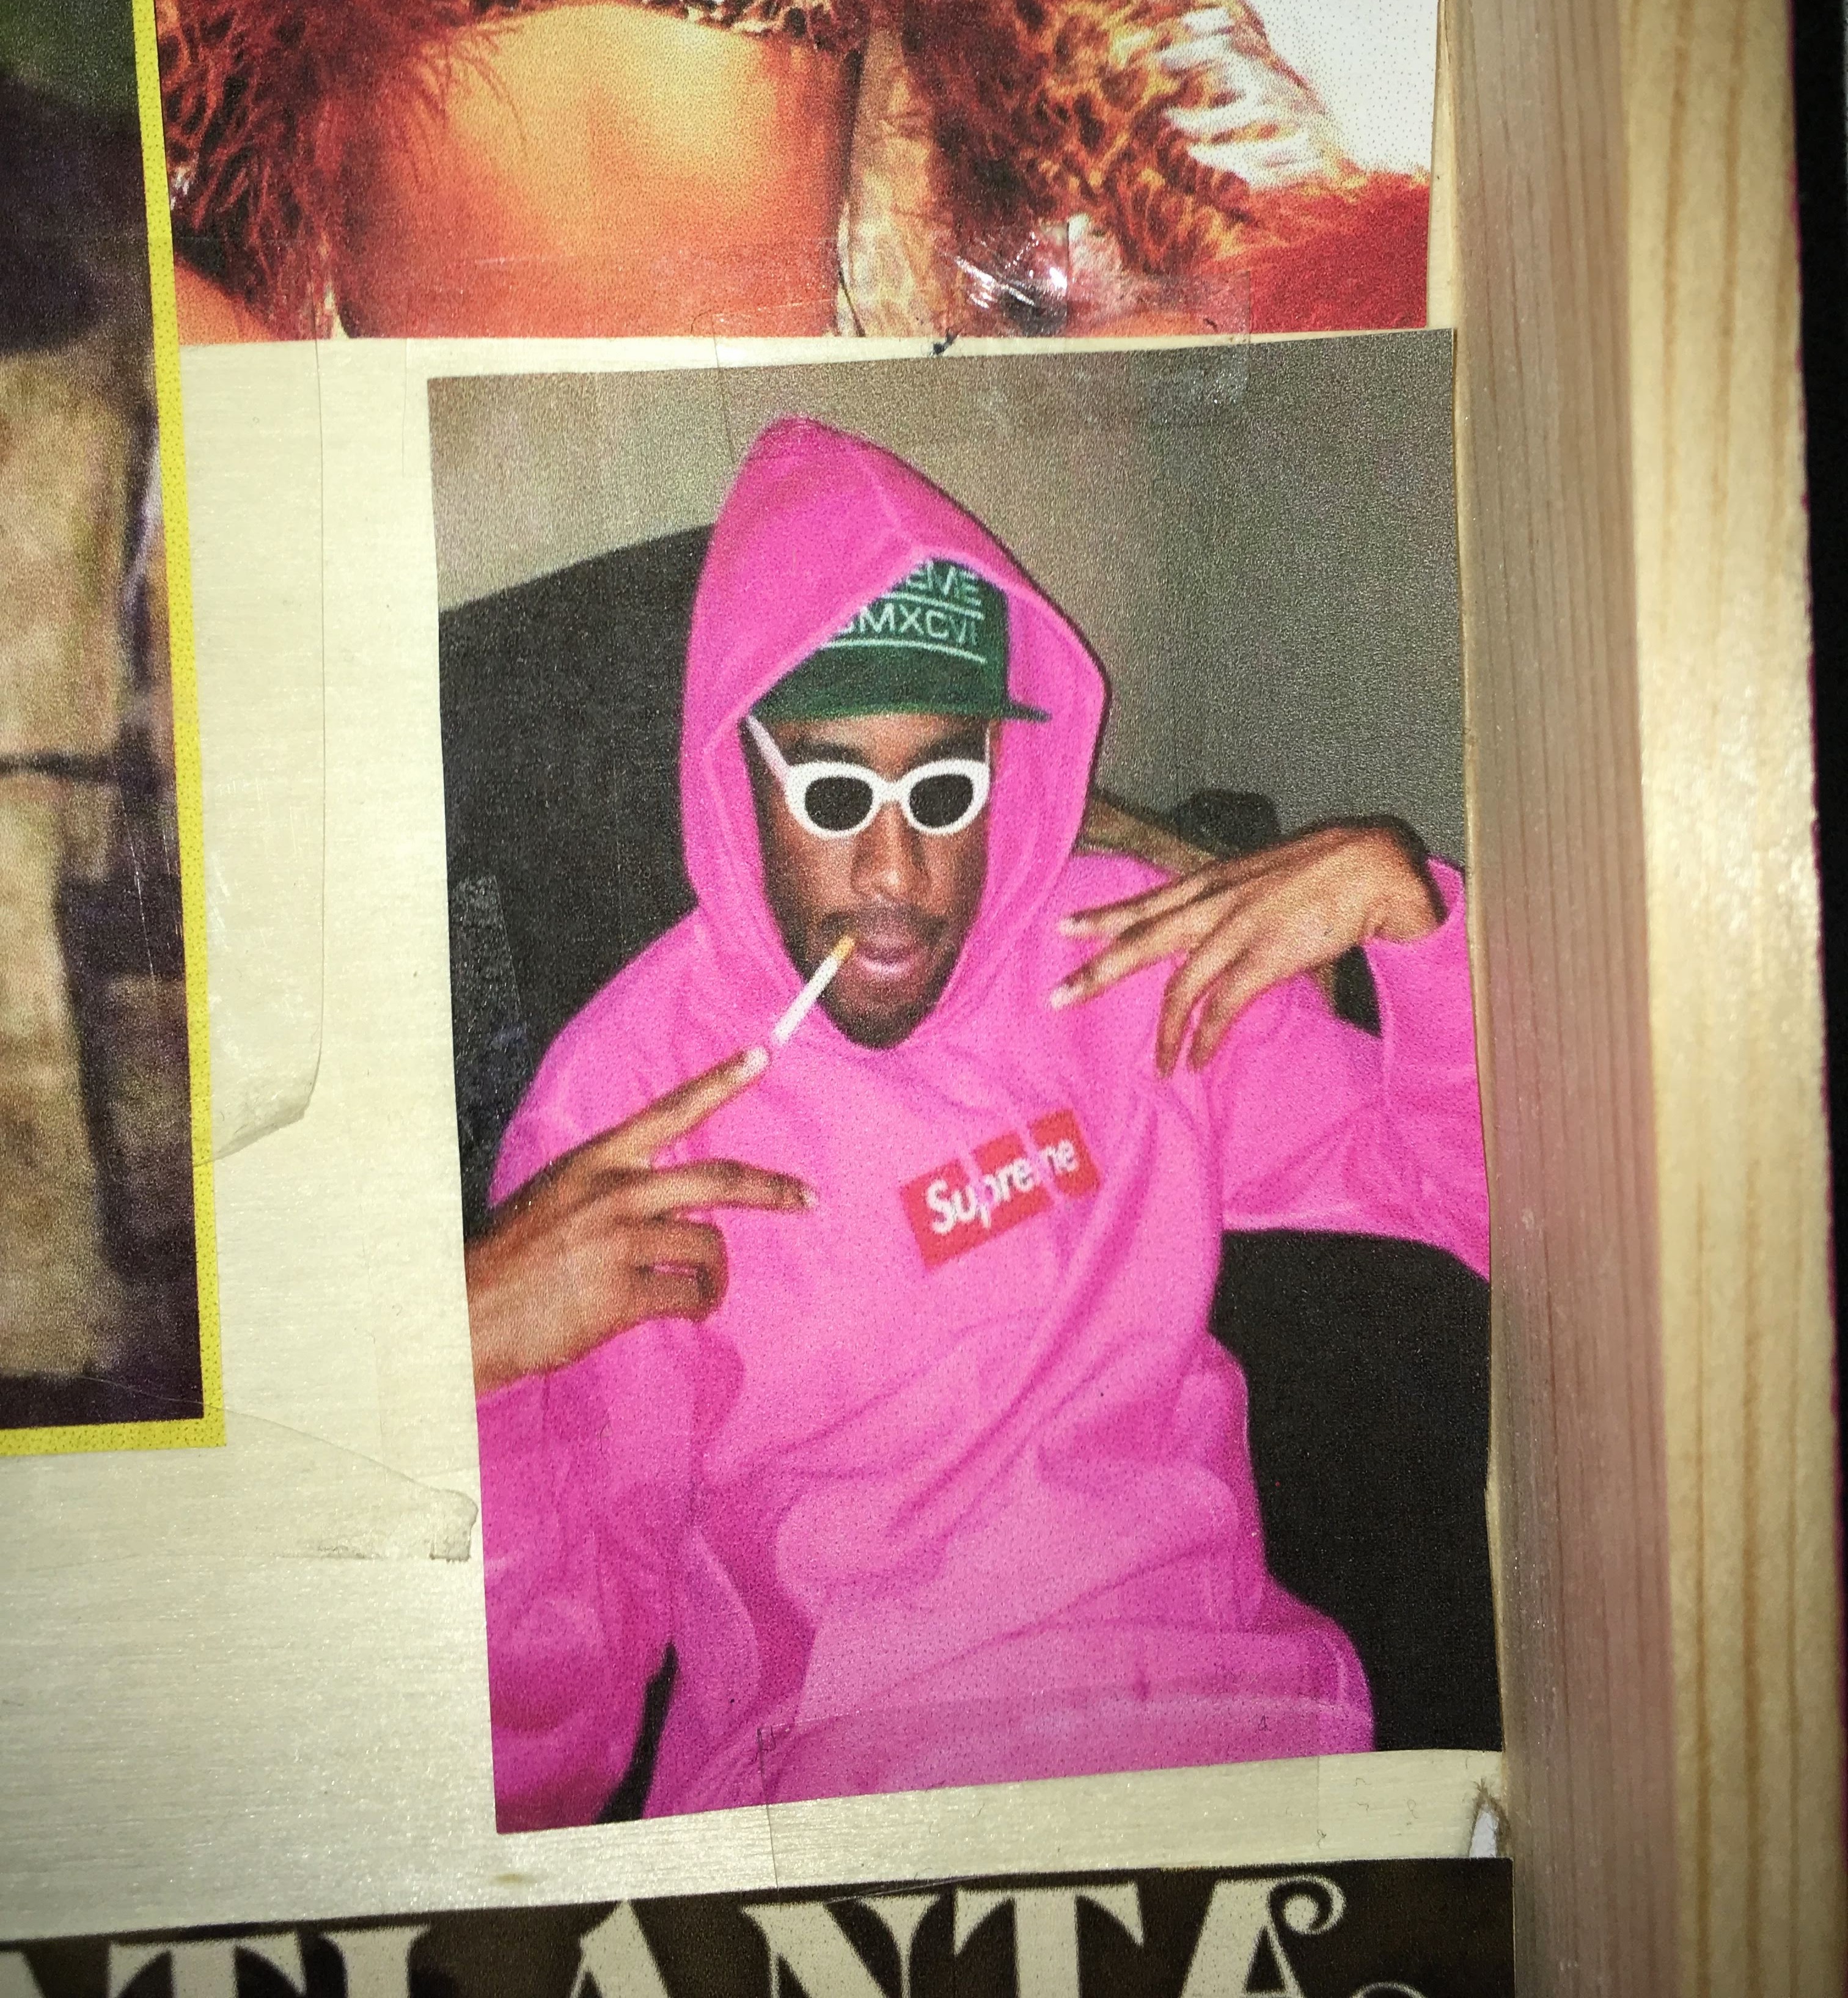 This image is a picture of Tyler, the Creator from a 2013 interview with ‘Noisey’. I placed this picture in the box because he is one of the main inspirations for my art. I placed this image under the ‘2010s fashion’ in my teaching module. However, he’s a current figure in hip-hop who has branched out into multiple fields of media, such as fashion.